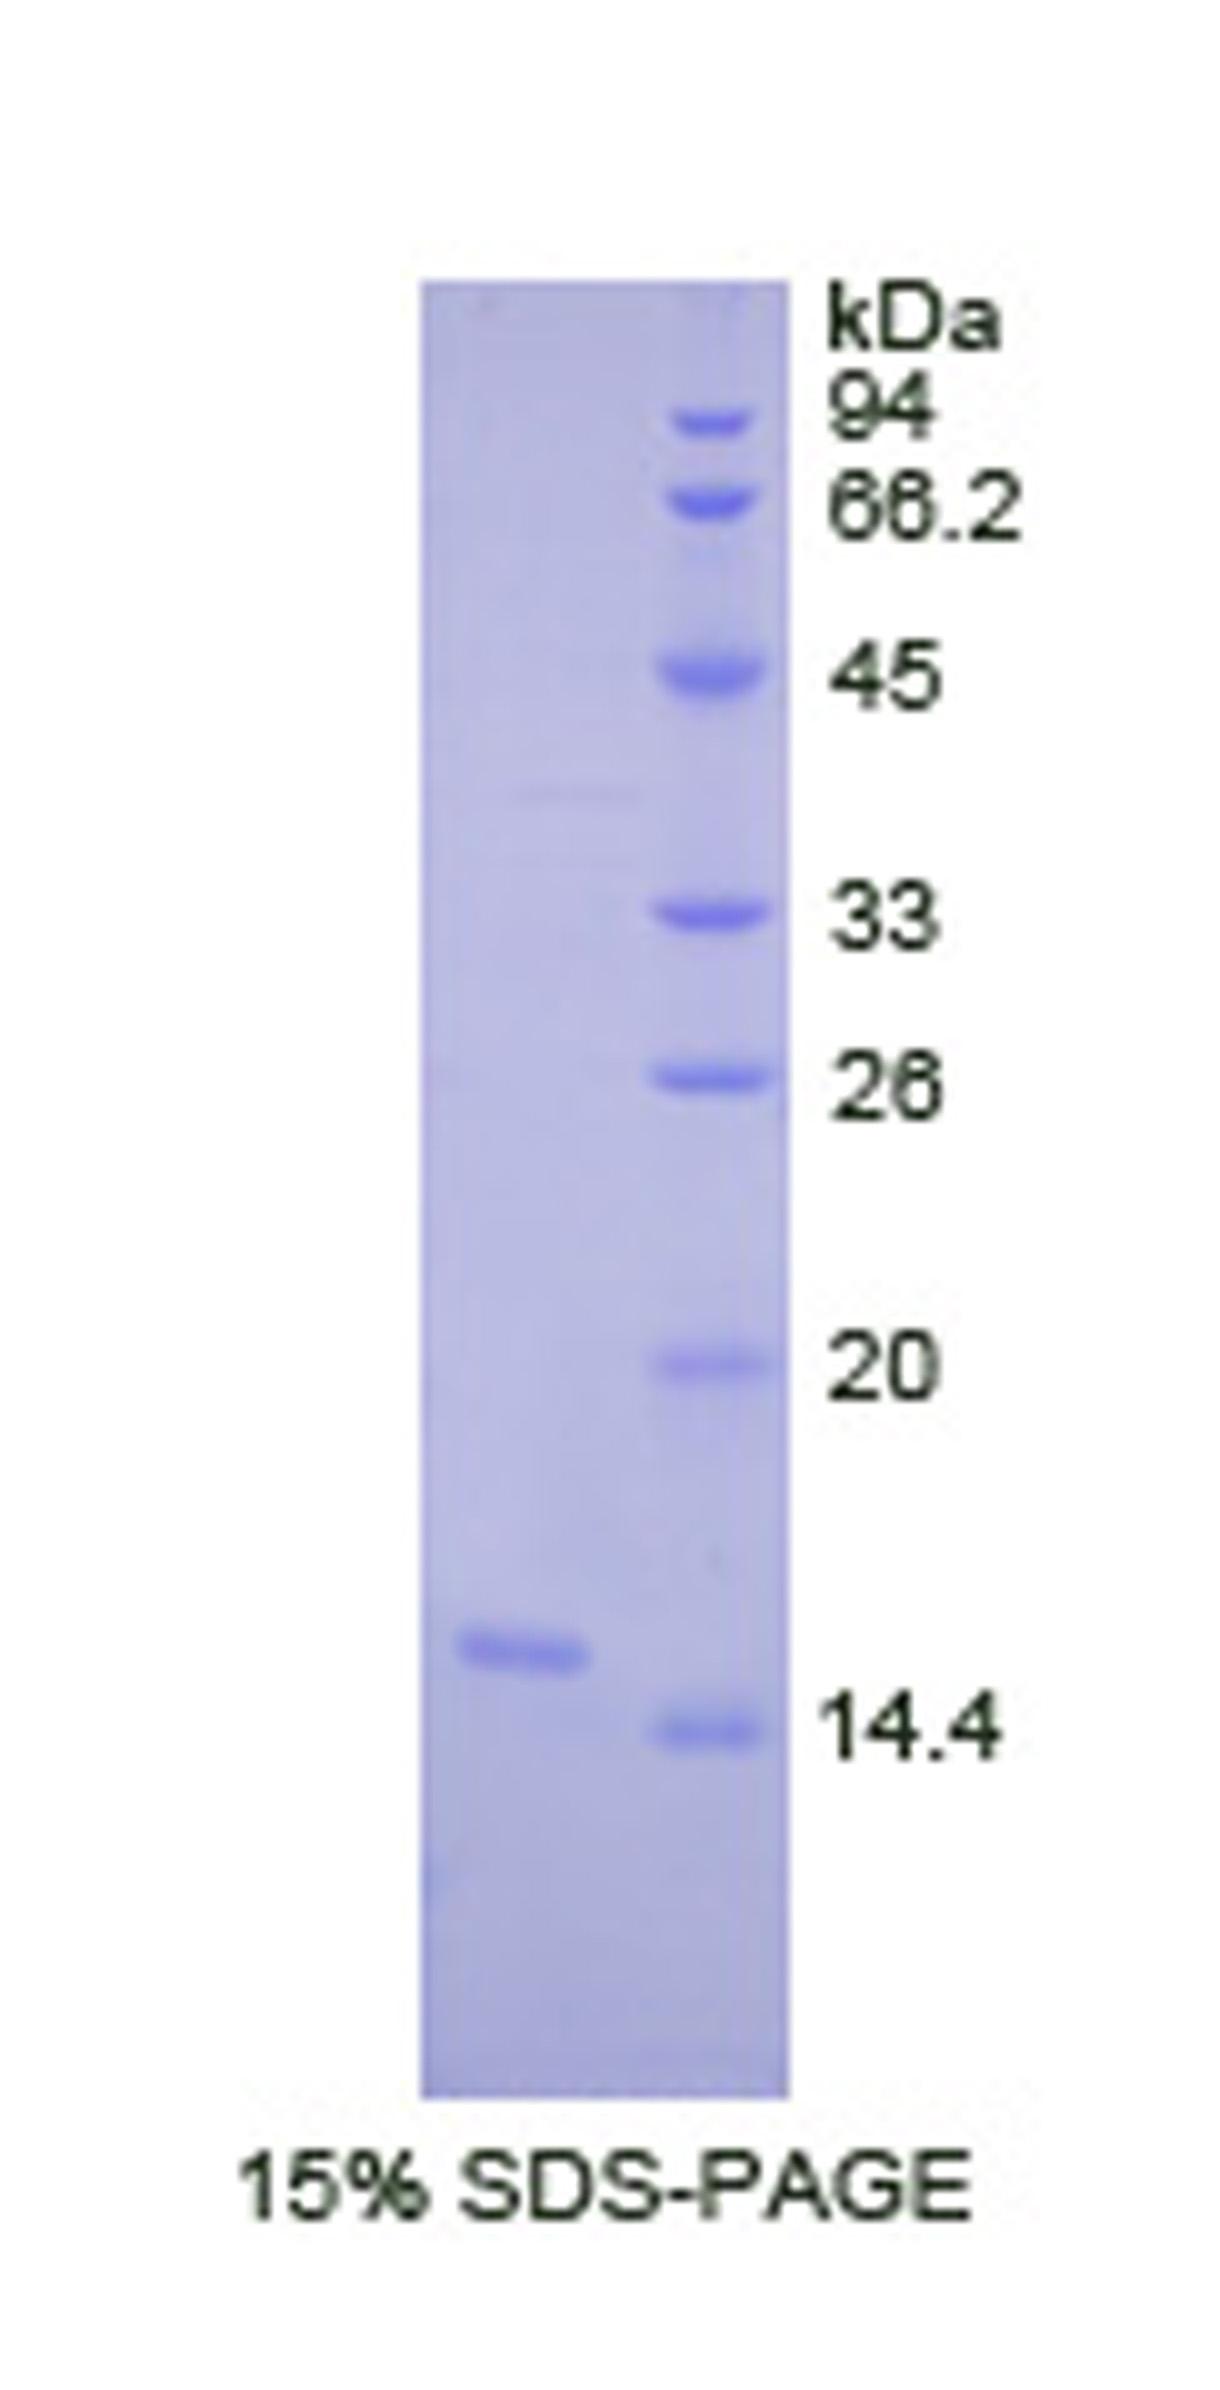 Recombinant Lysyl Oxidase Like Protein 2 (LOXL2)